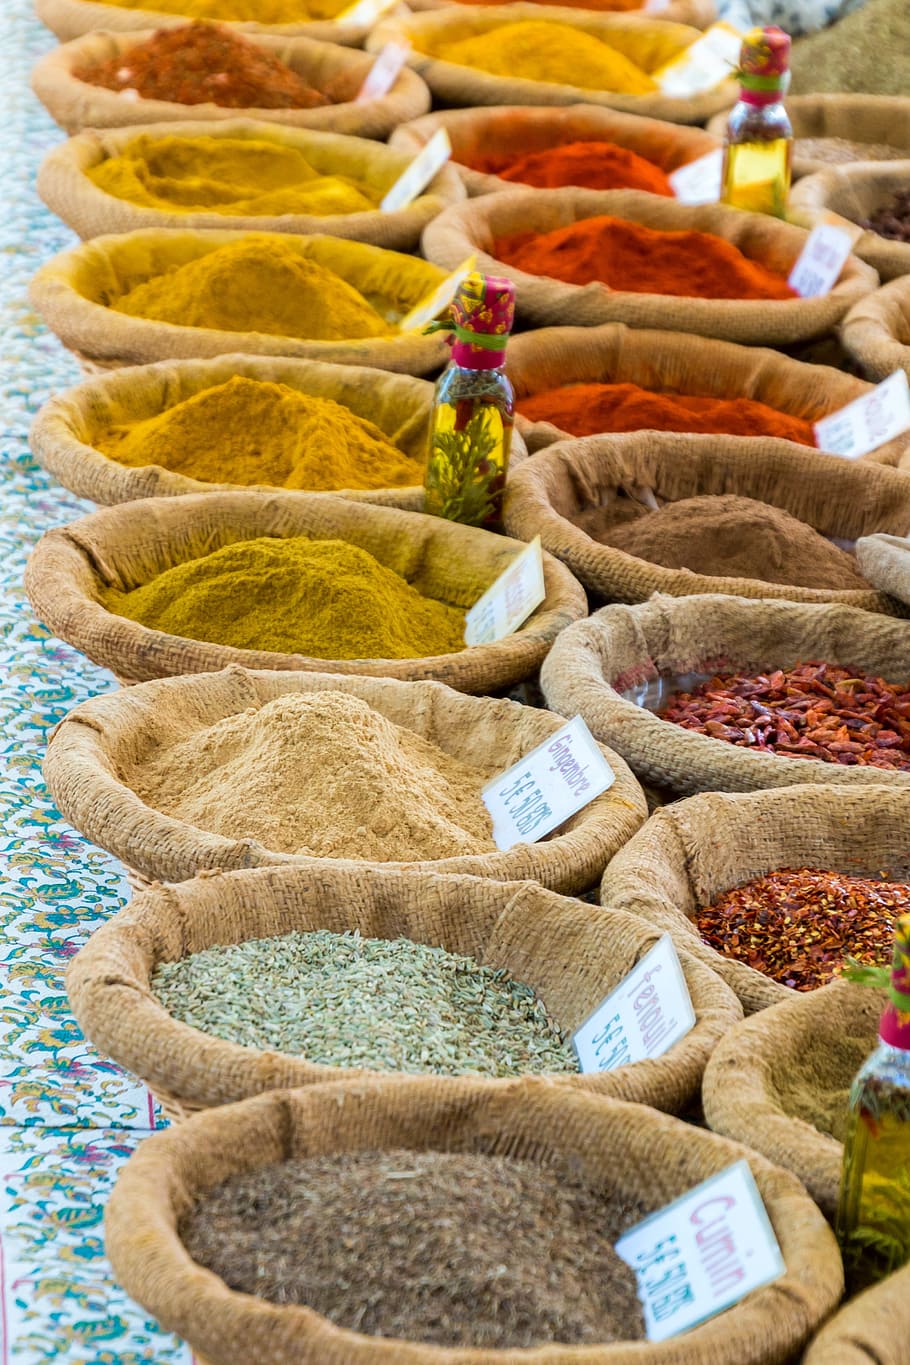 bag, assorted-flavor spices lot, spices, curry, market stall, colorful, paprika, market, pepper, color